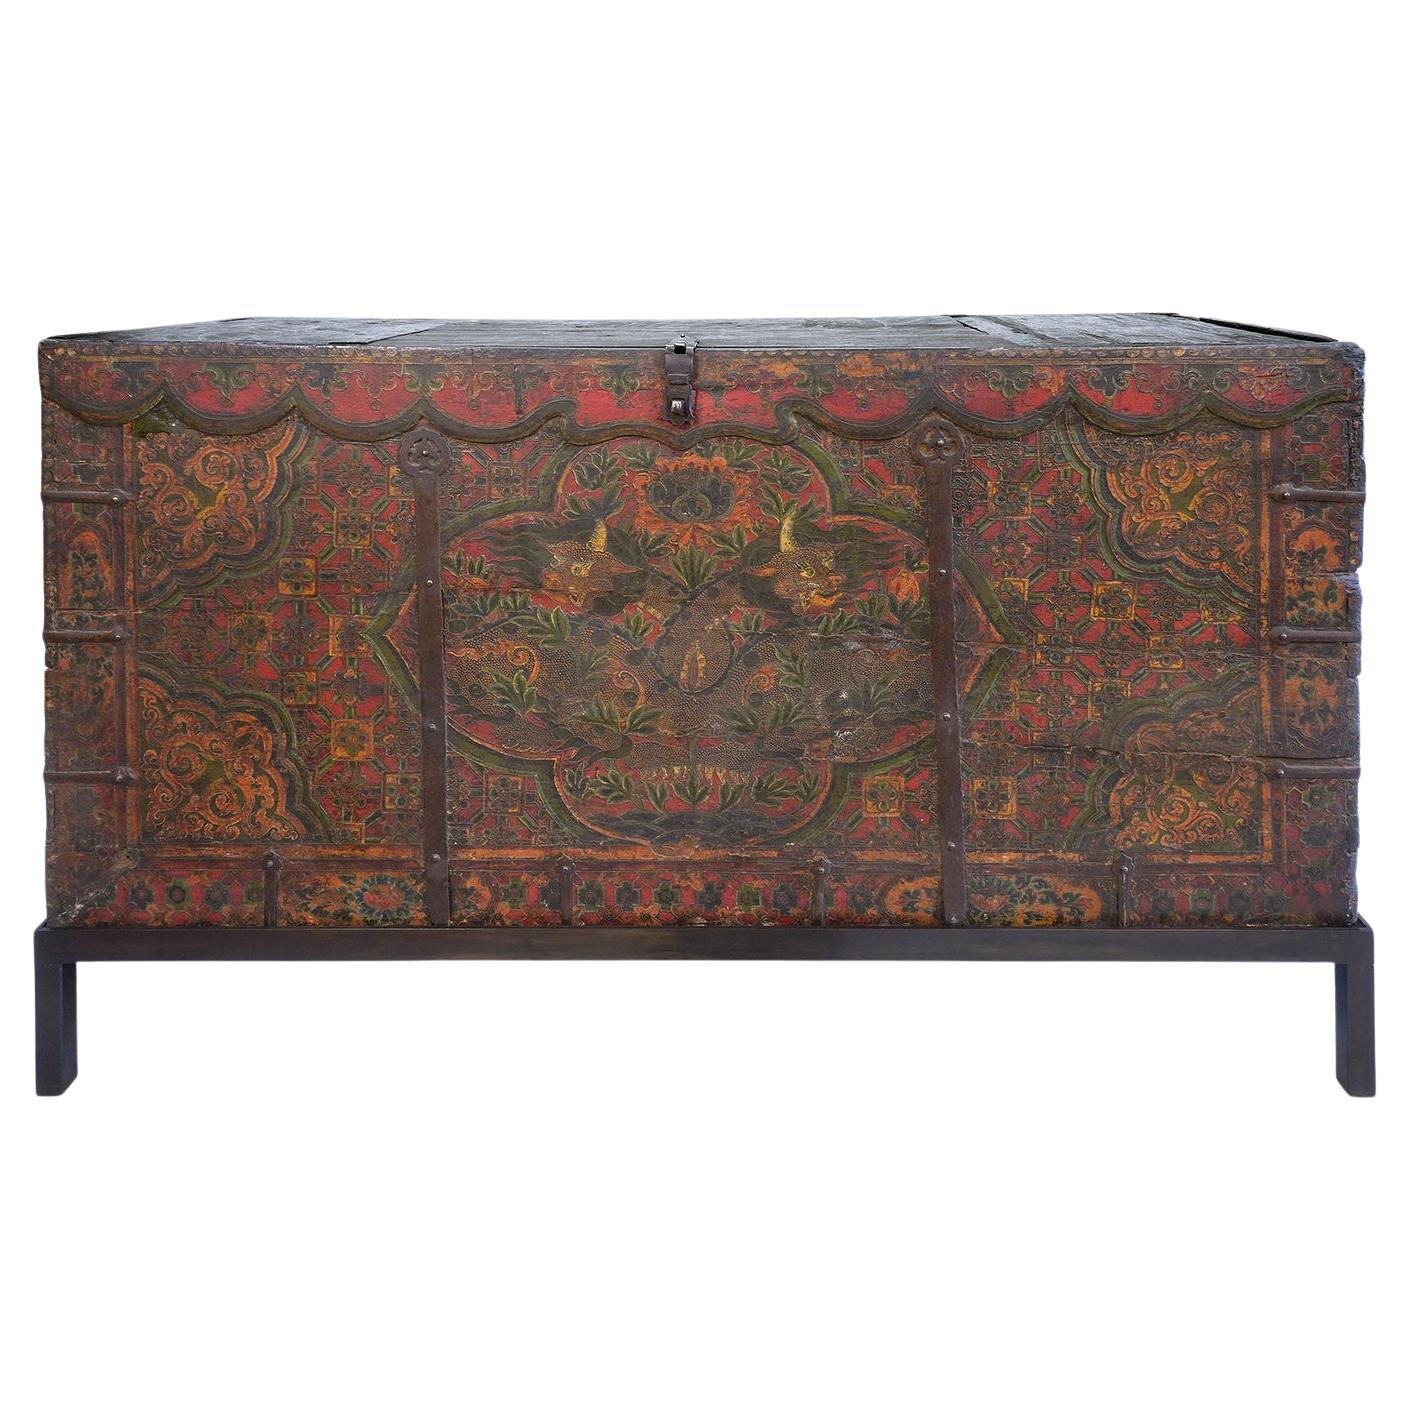 Large Tibetan Chest with Hand-Painted Front